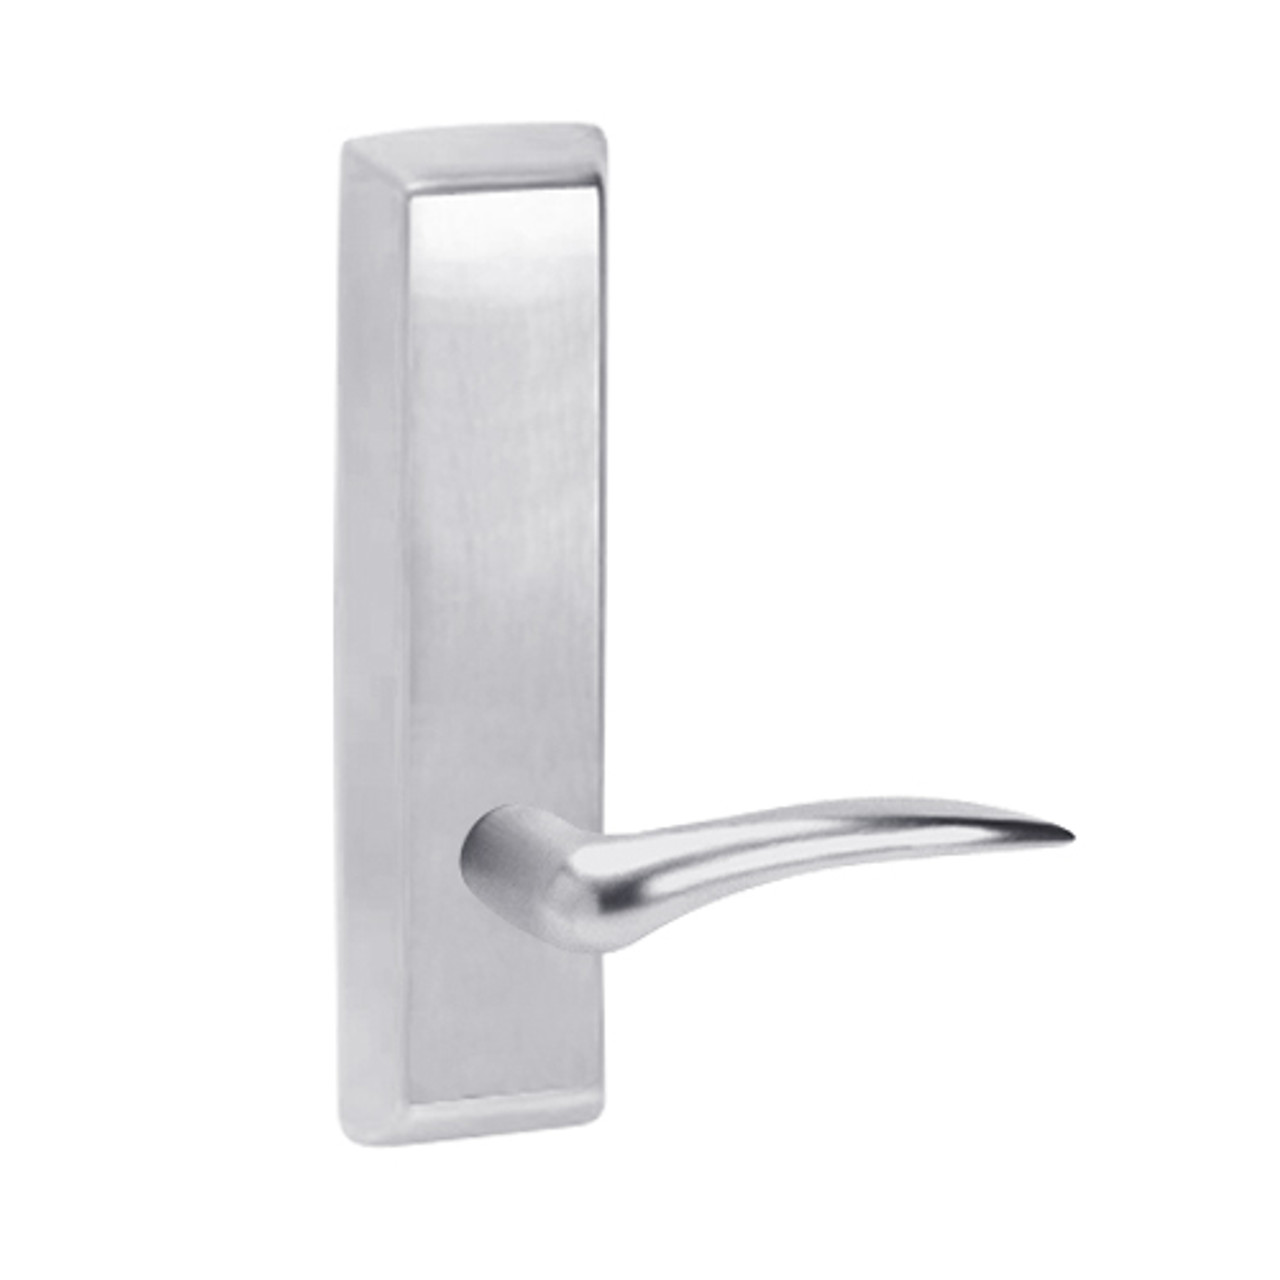 D955-625-RHR Corbin ED5000 Series Exit Device Trim with Classroom Dirke Lever in Bright Chrome Finish